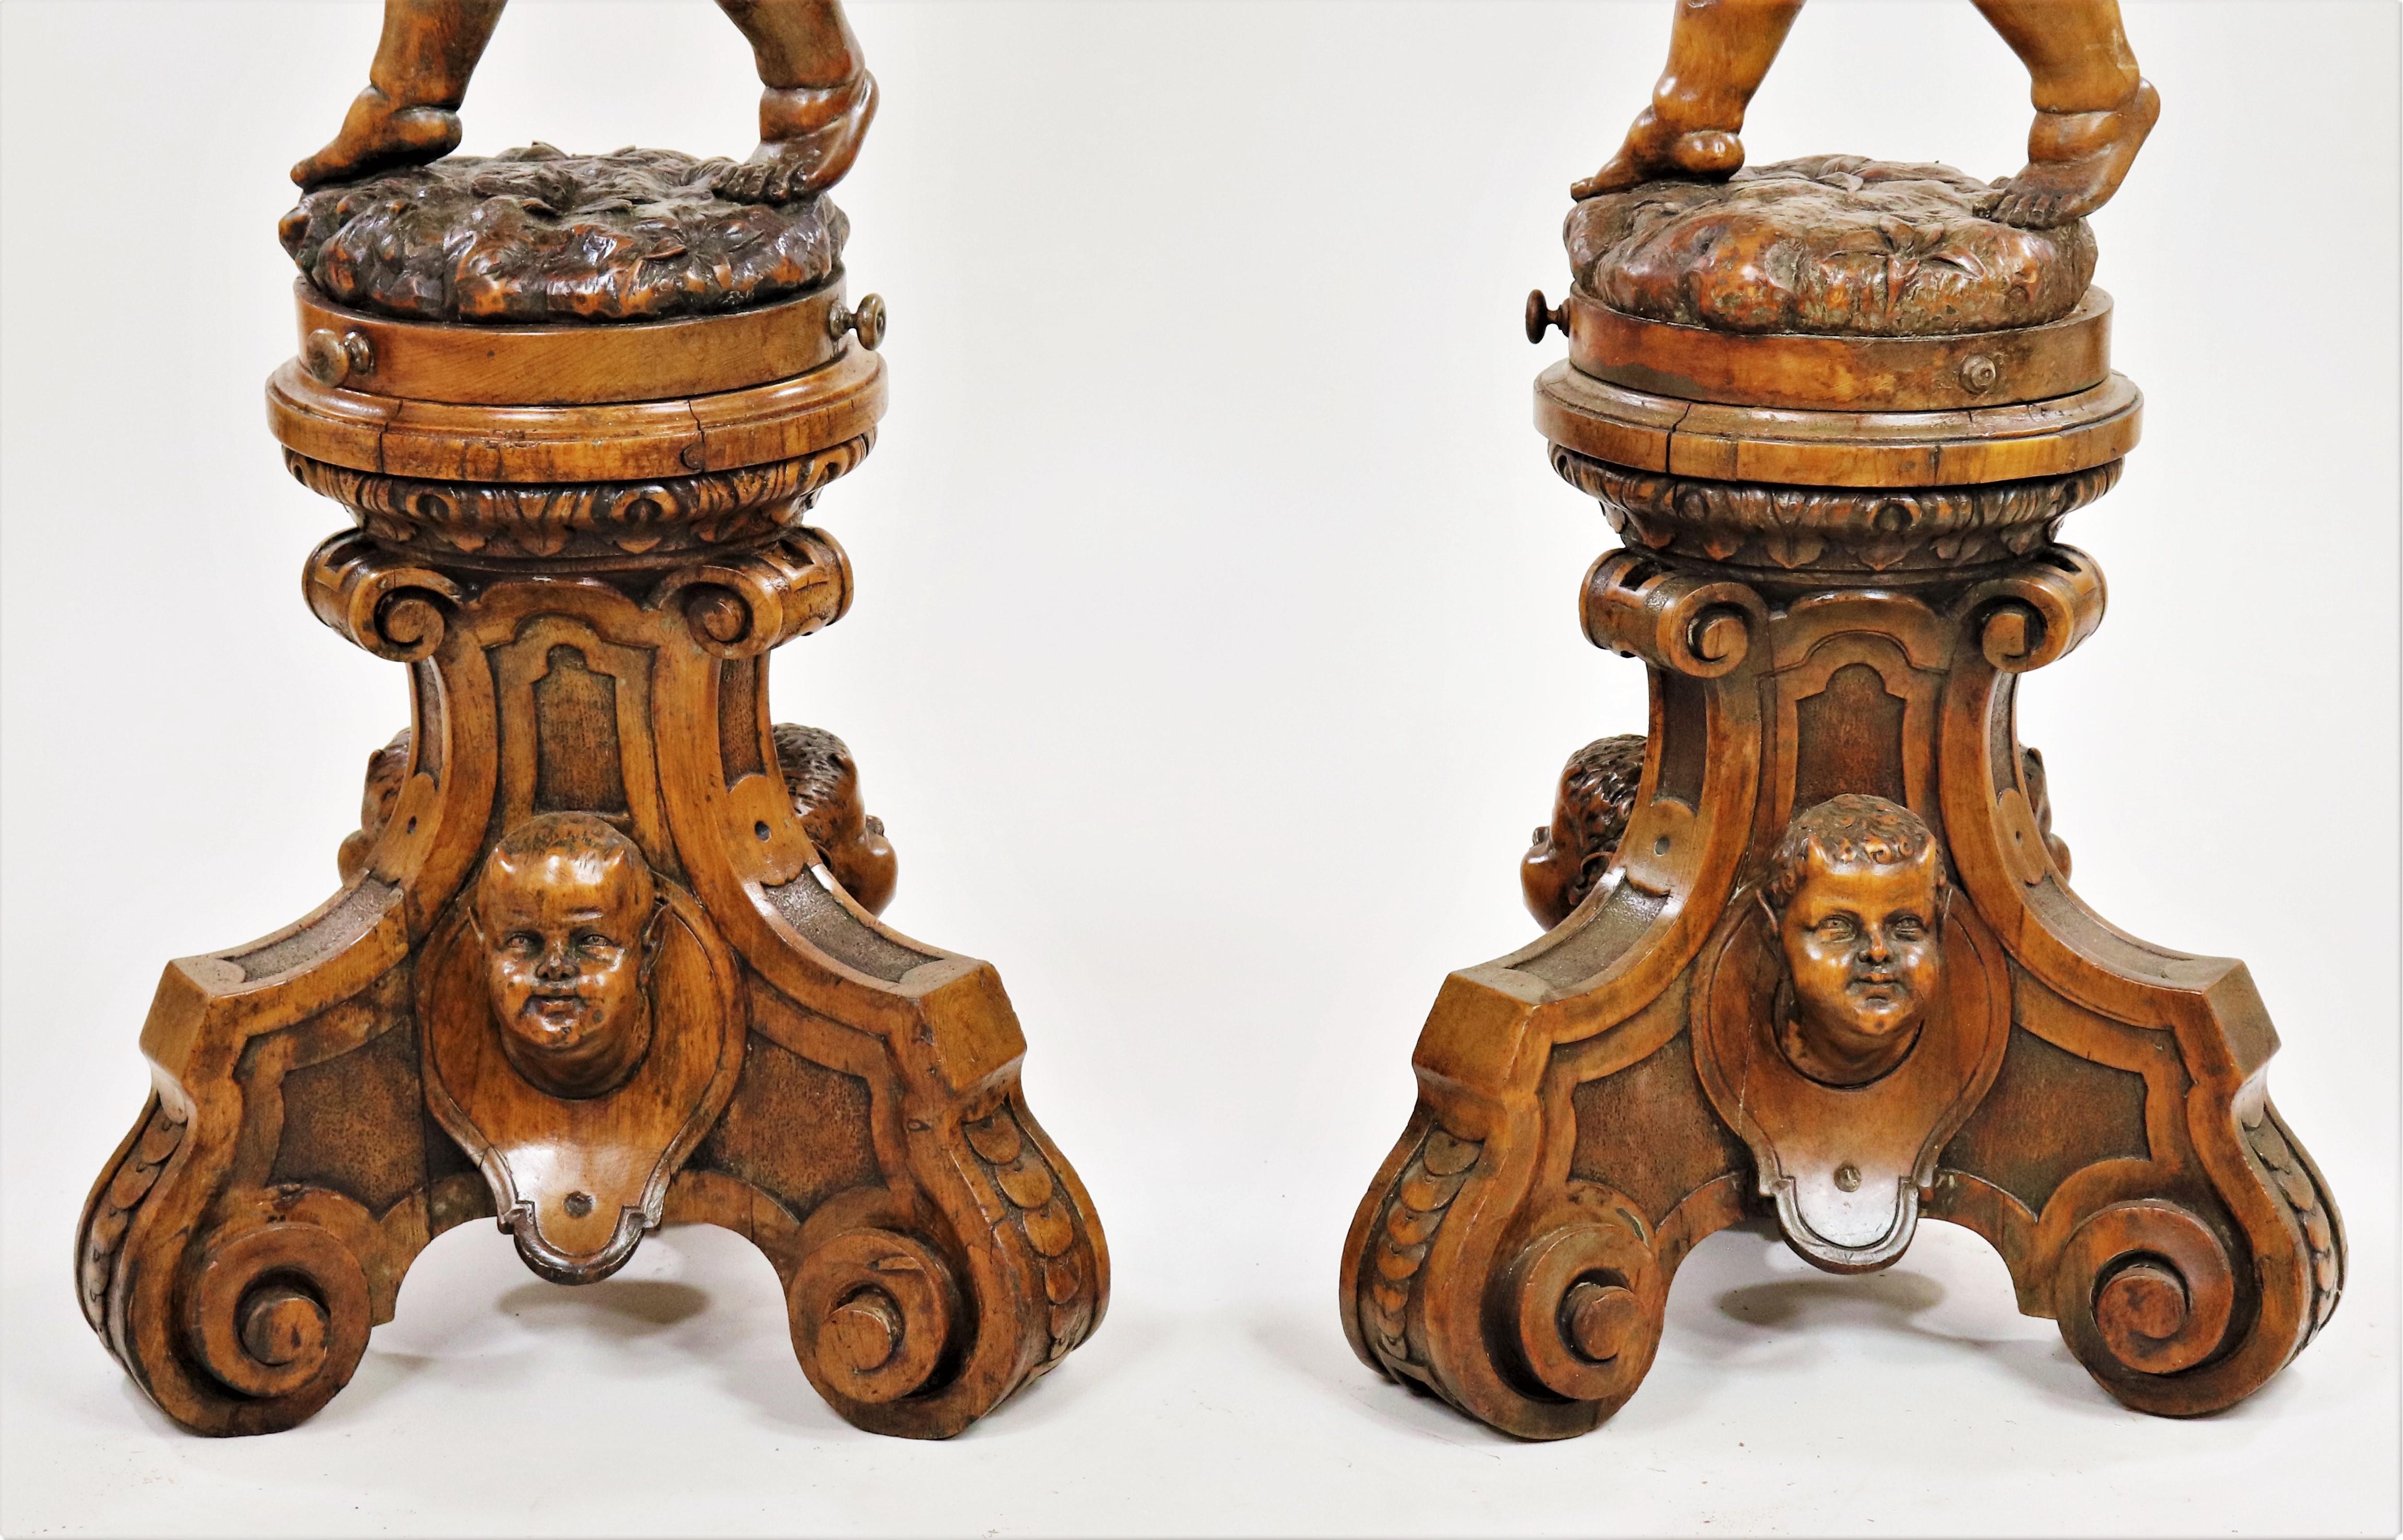 Pair of 19th Century Italian Carved Wood Figures of Cherubs/Putti For Sale 3